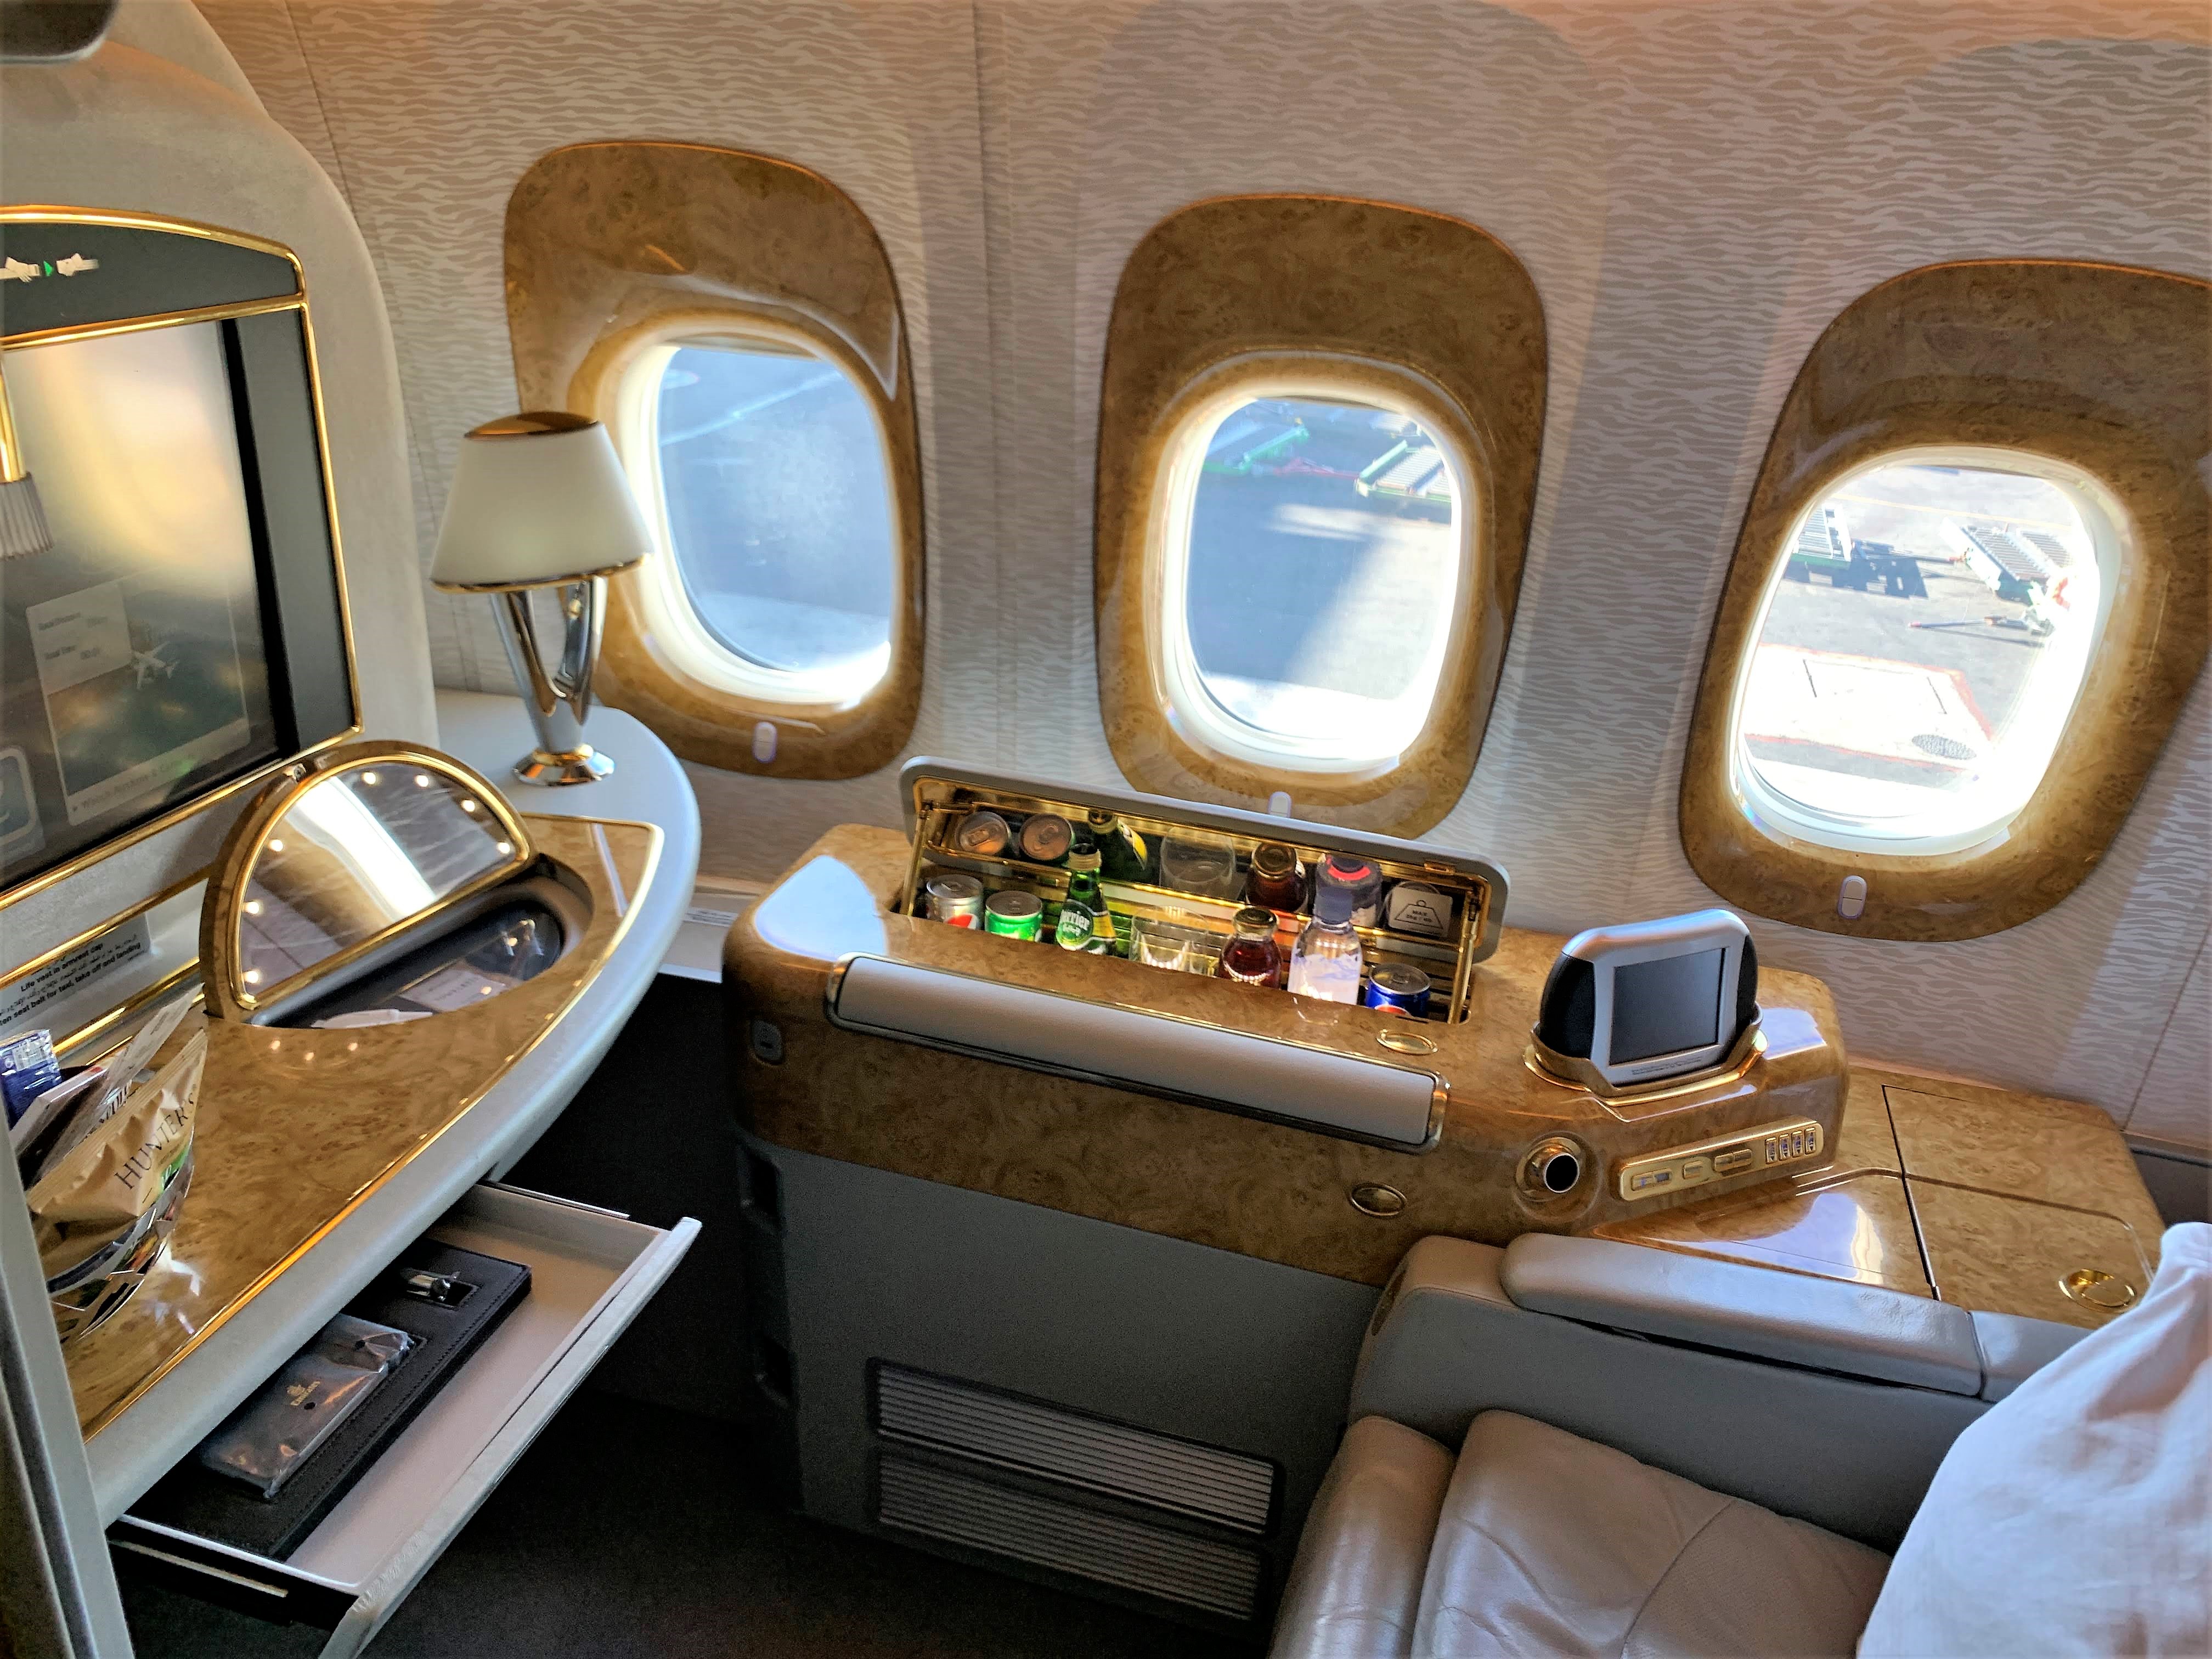 Emirates 777 First Class Review Turning Left for Less